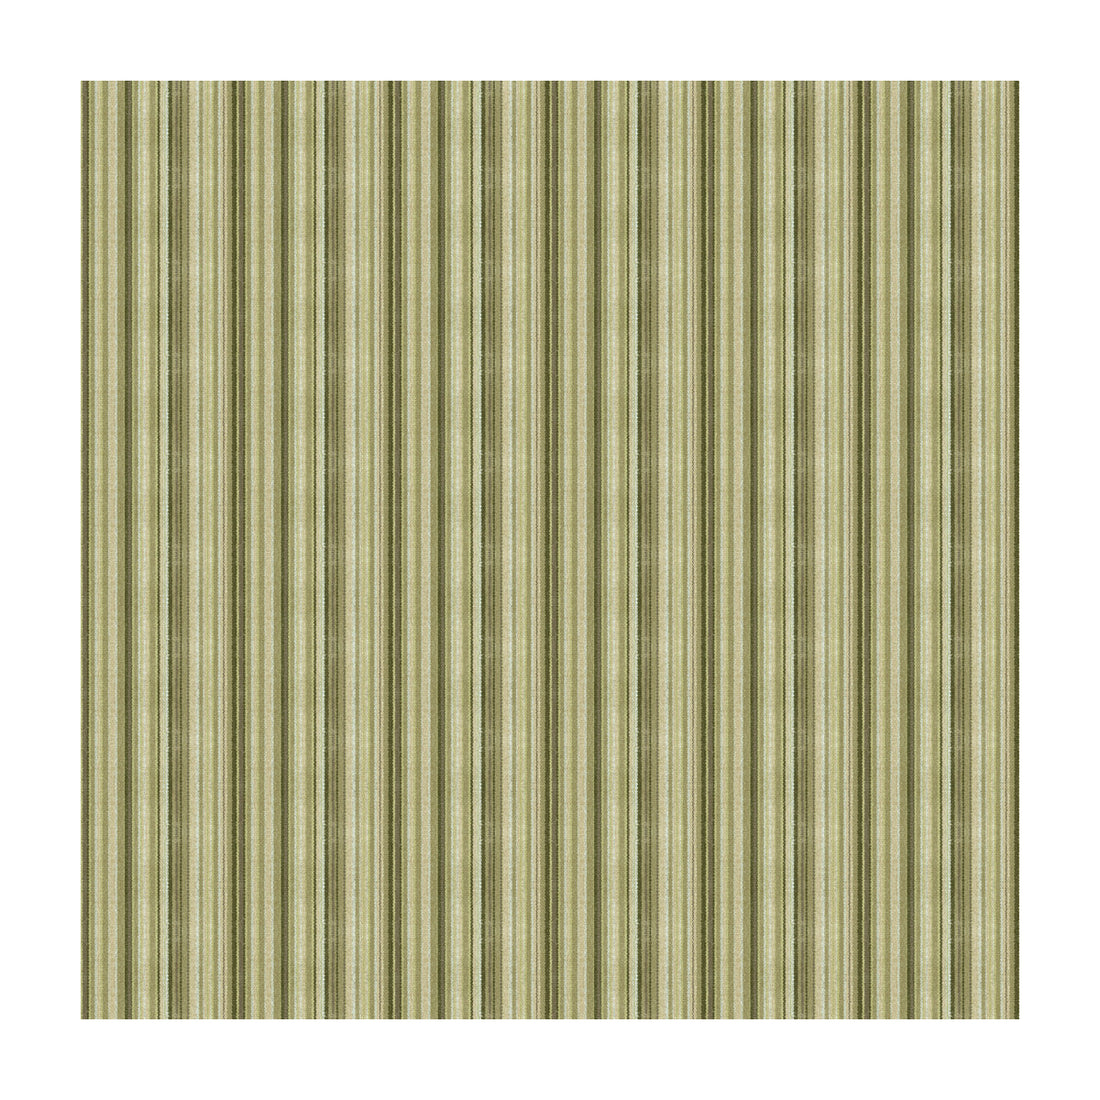 Funicular Lines fabric in spring color - pattern 33928.316.0 - by Kravet Couture in the Barbara Barry Chalet collection